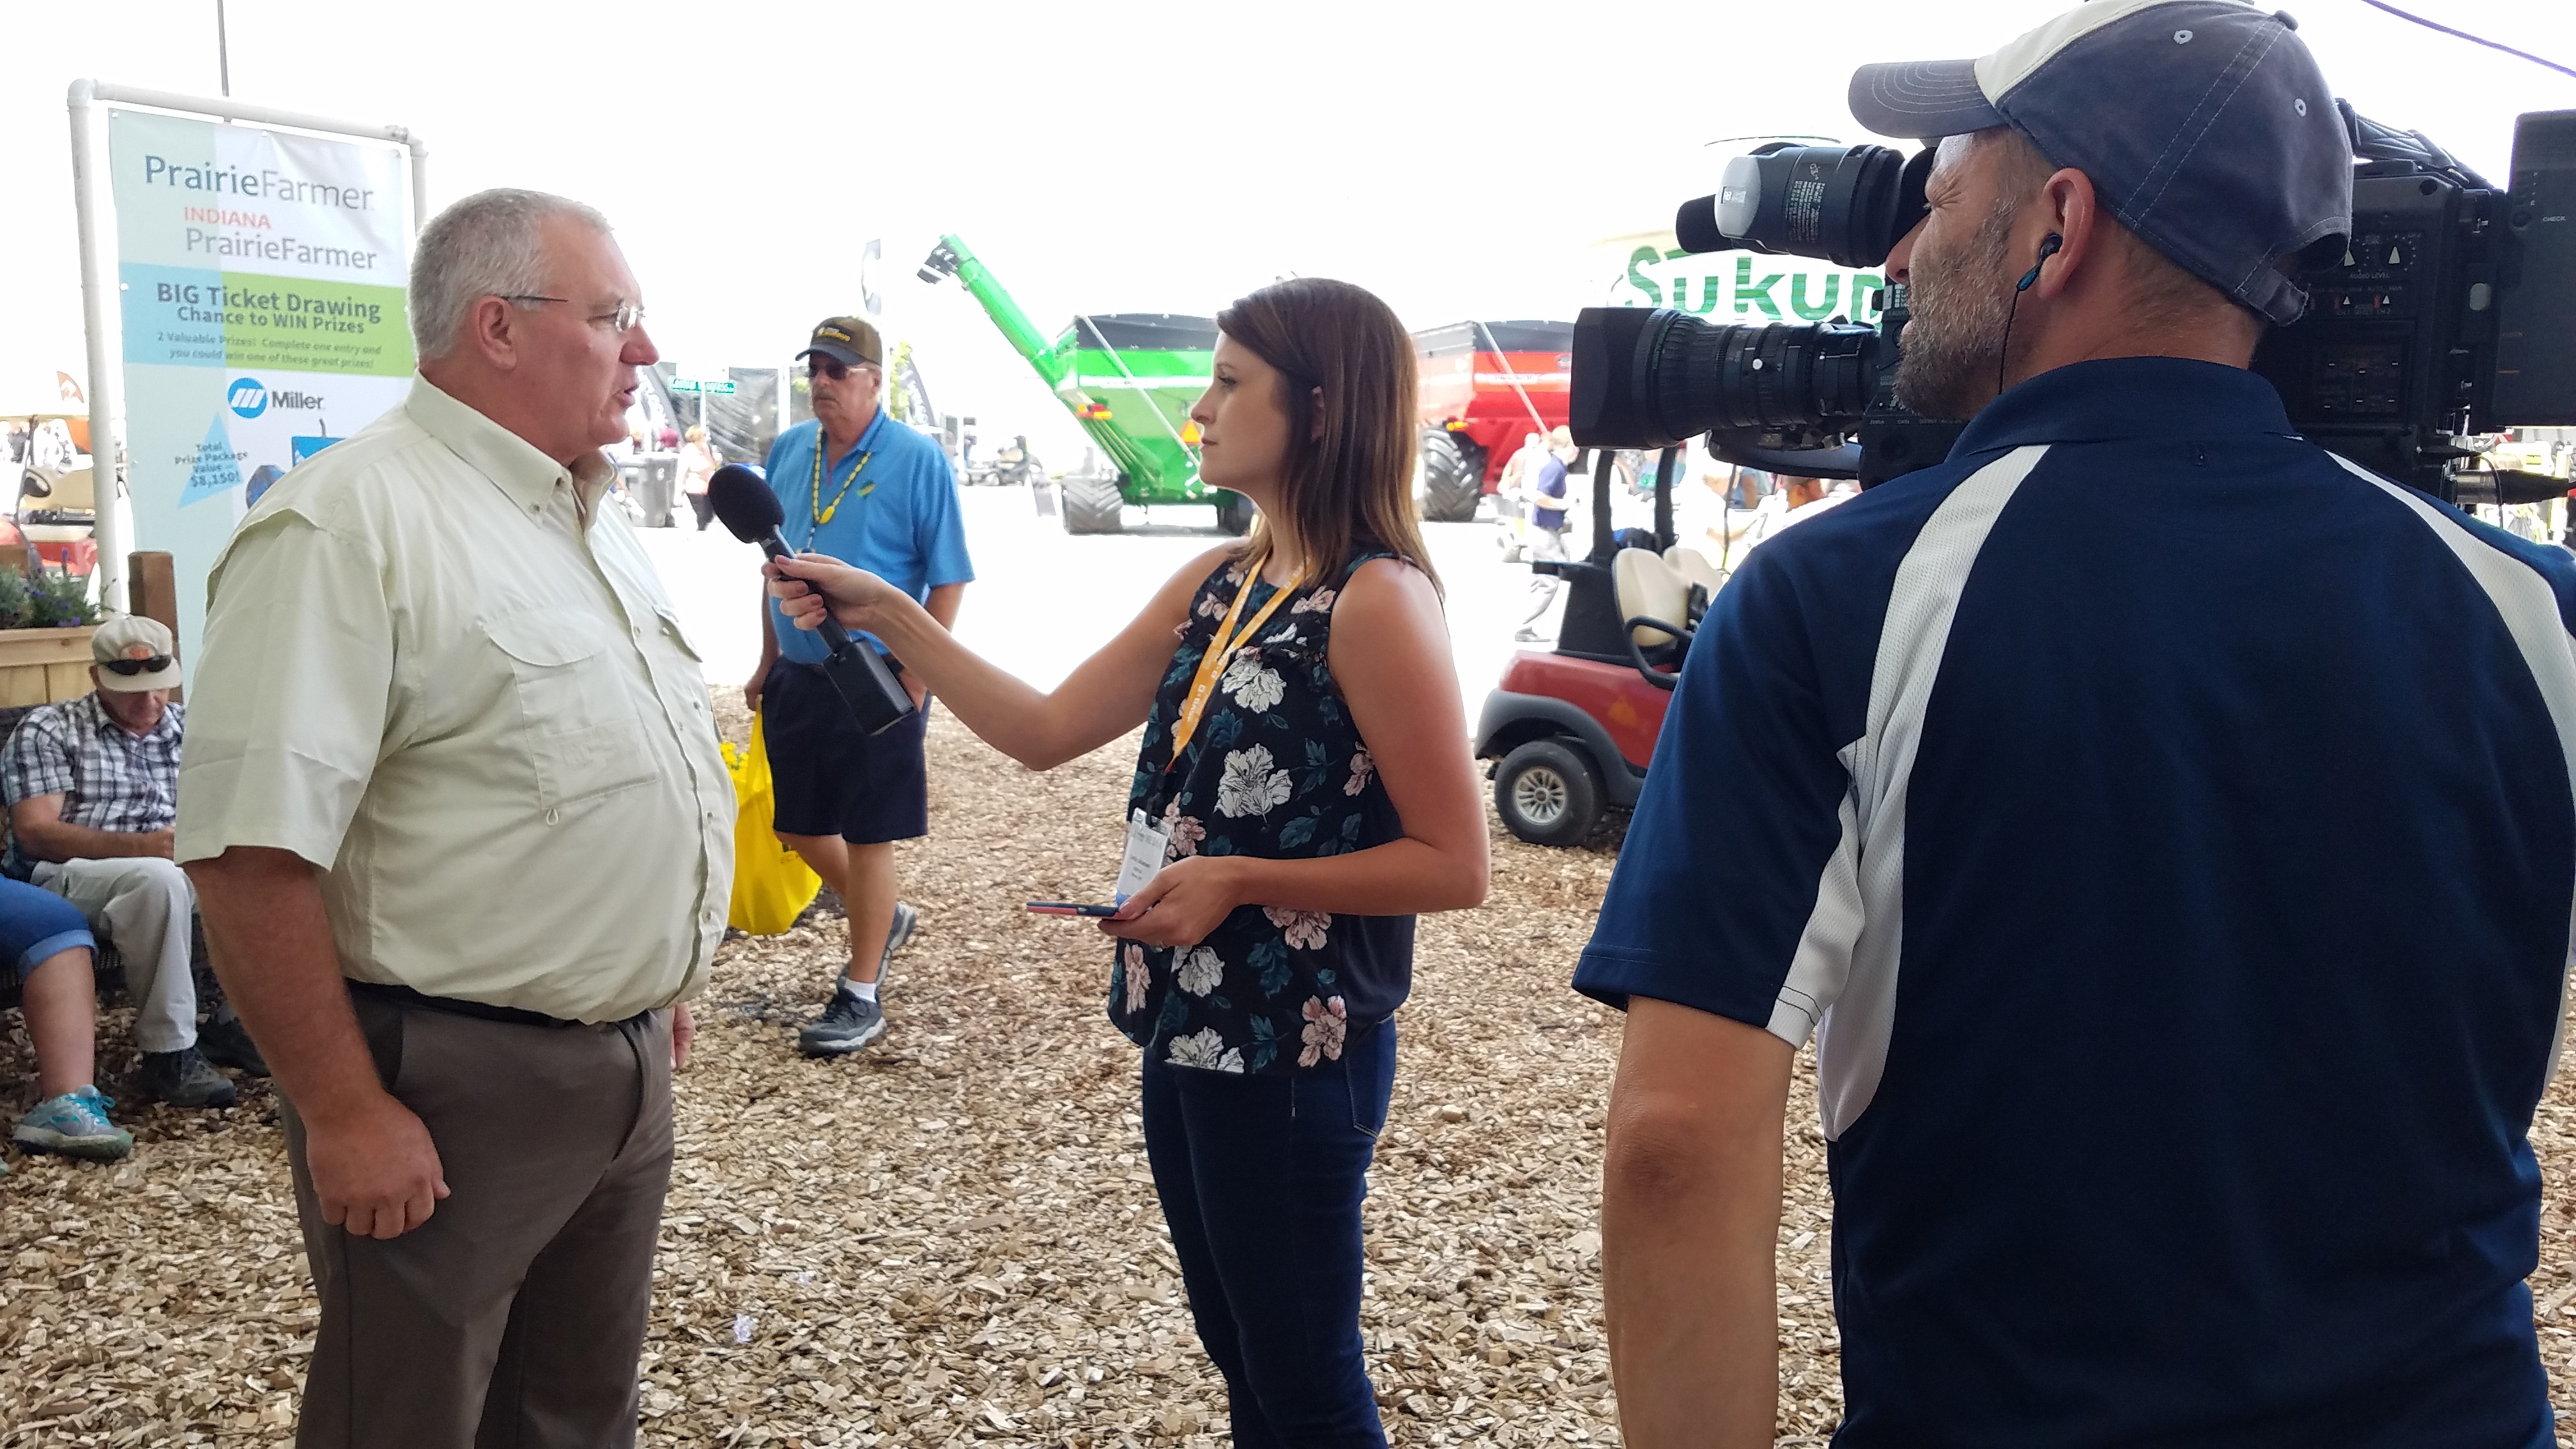 Farm Progress Show - This Week In Agribusiness
